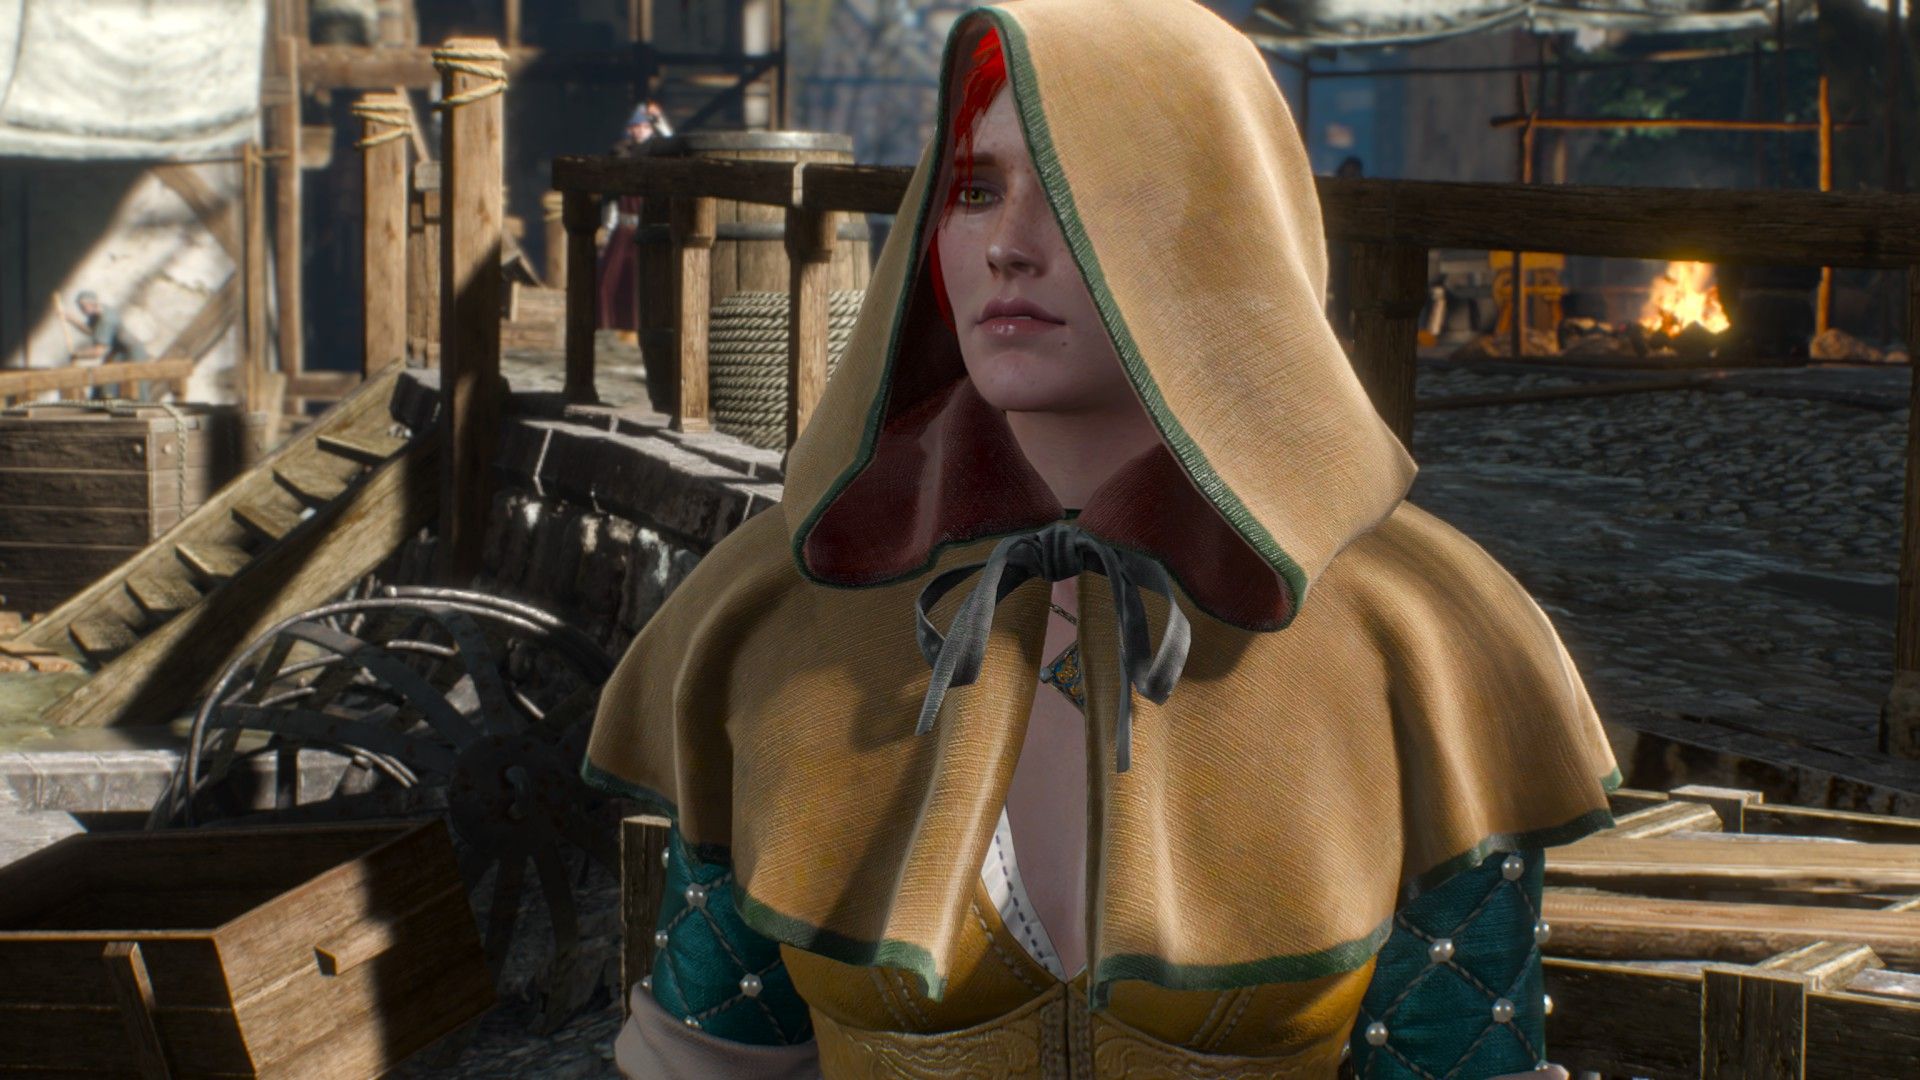 Triss Merigold stands in the middle of a medieval city wearing a hood to disguise her identity.